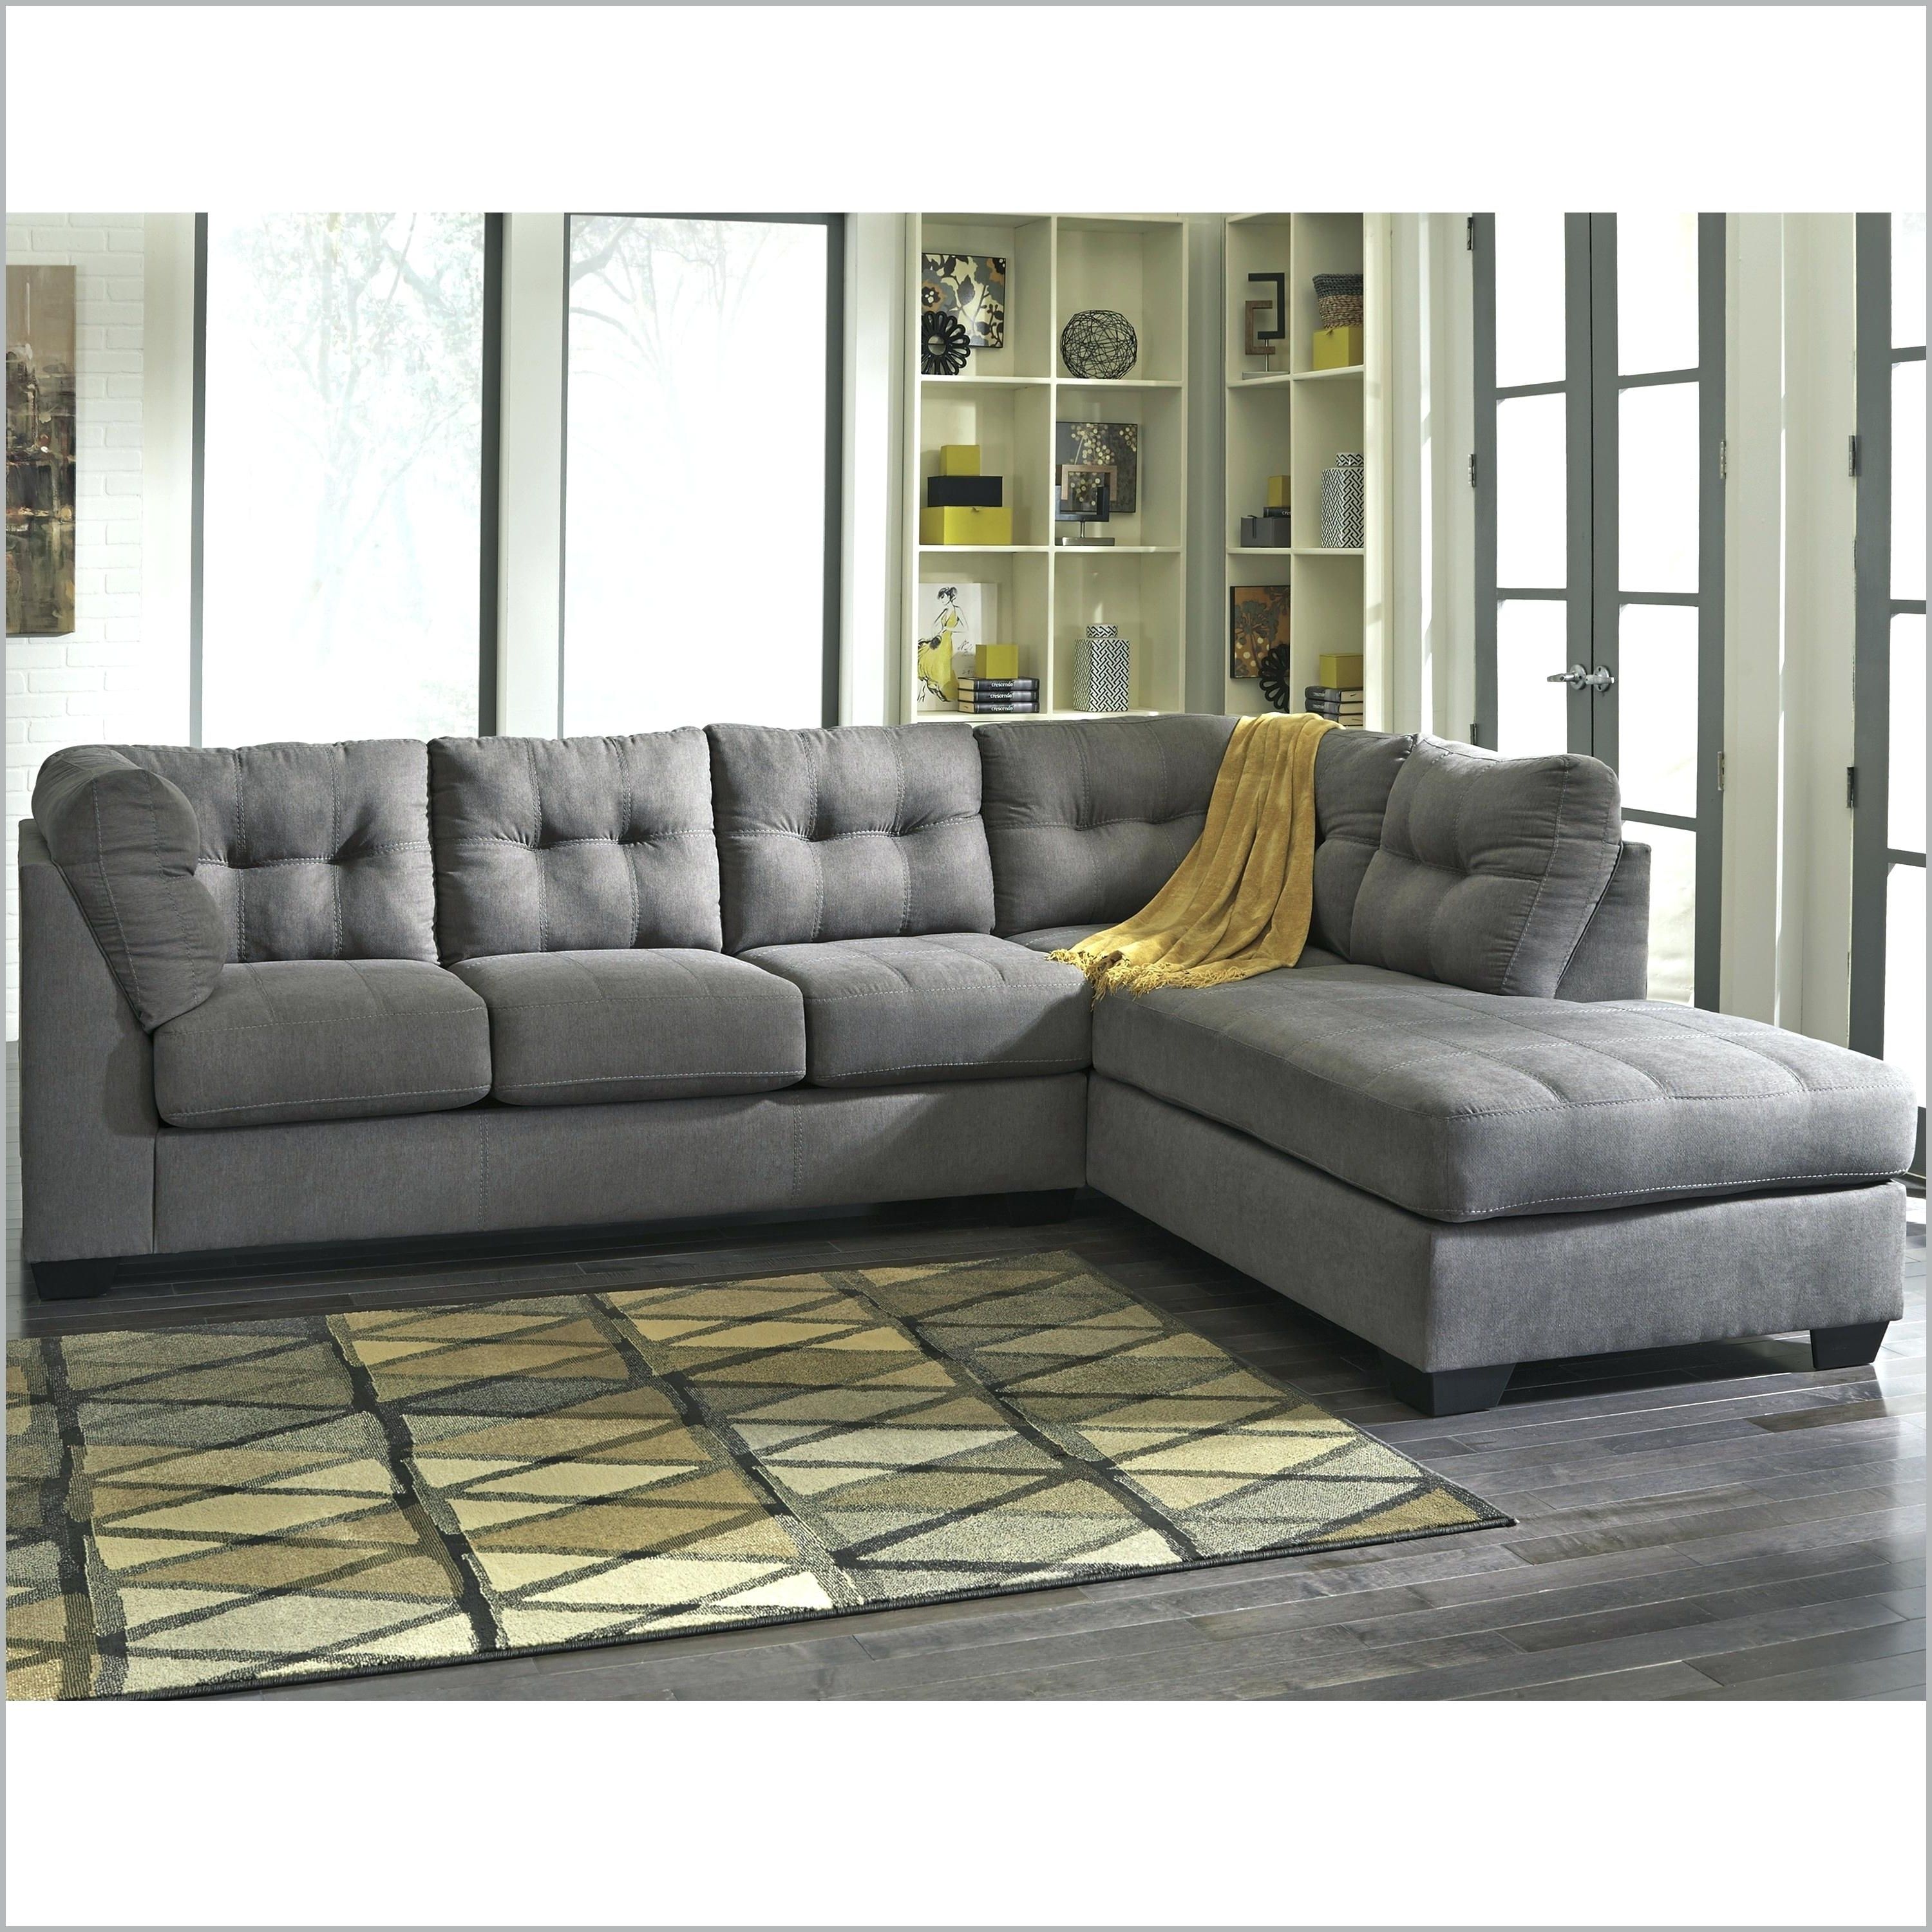 Most Current Sectional Sofas Okc For Sale Cheap In Oklahoma City Regarding Okc Sectional Sofas (View 1 of 20)